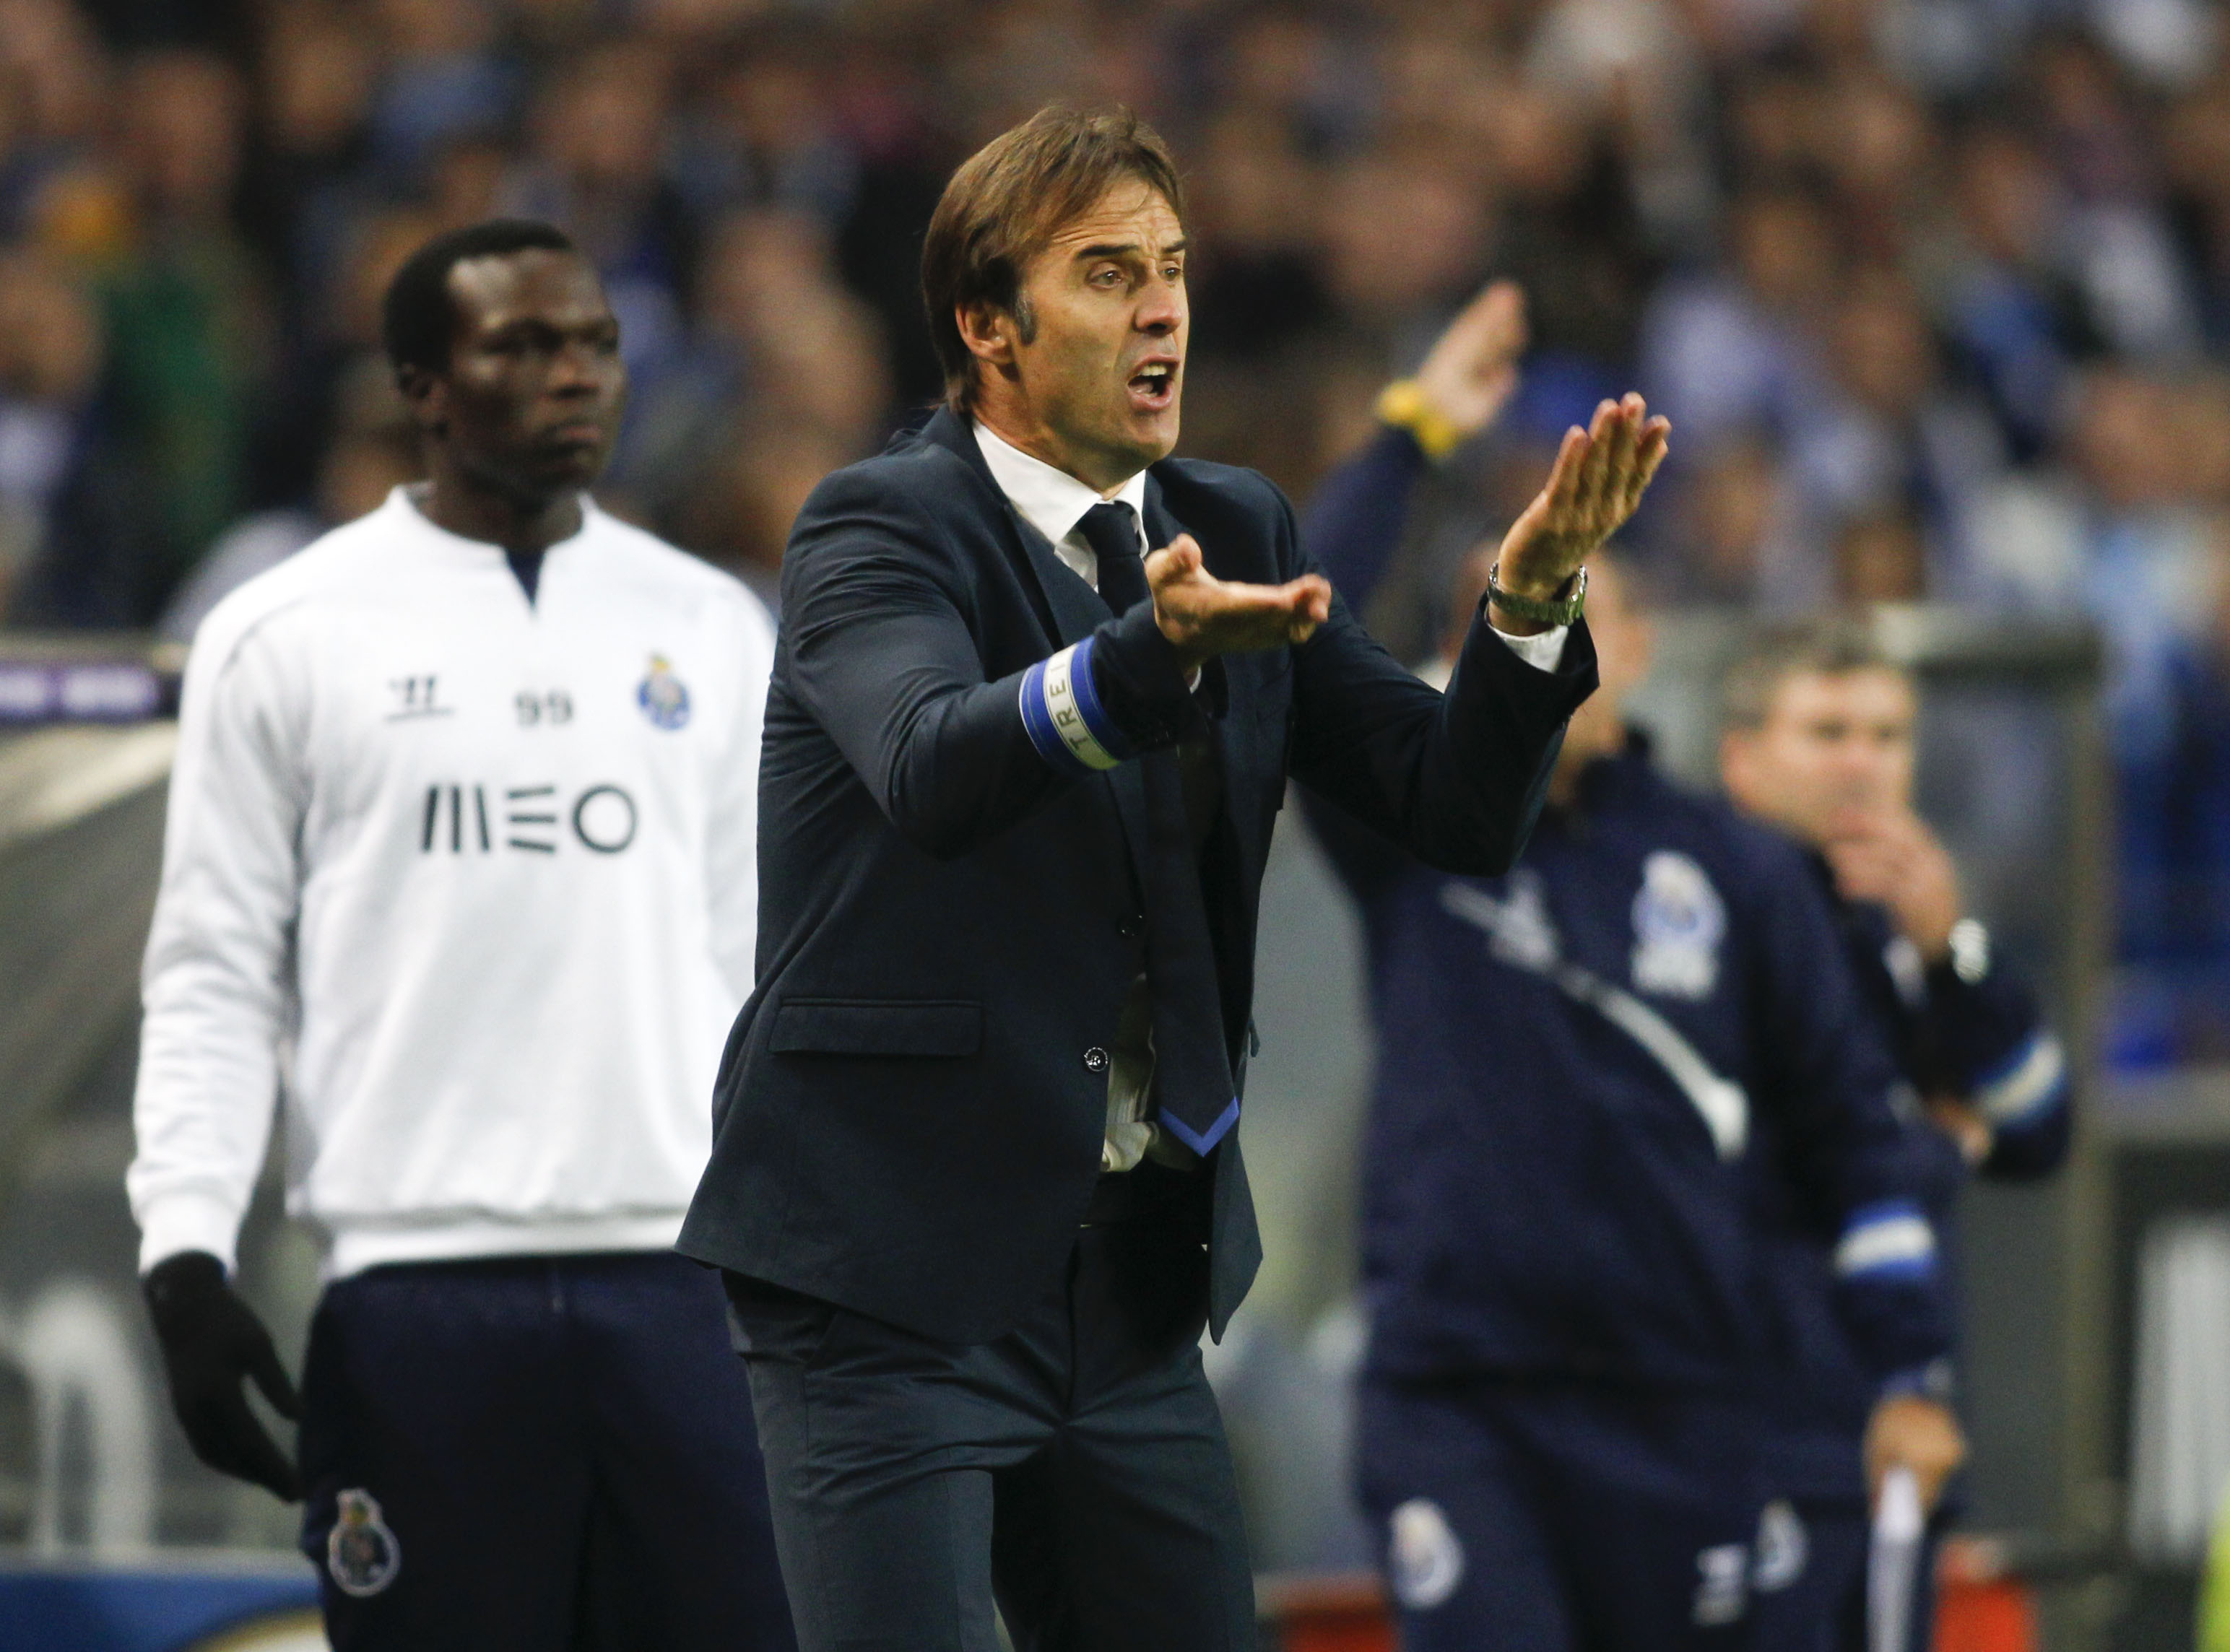 Porto's coach Julen Lopetegui reacts during their Portuguese Premier League soccer match against Benfica at Dragao stadium in Porto December 14, 2014. REUTERS/Miguel Vidal (PORTUGAL - Tags: SPORT SOCCER)